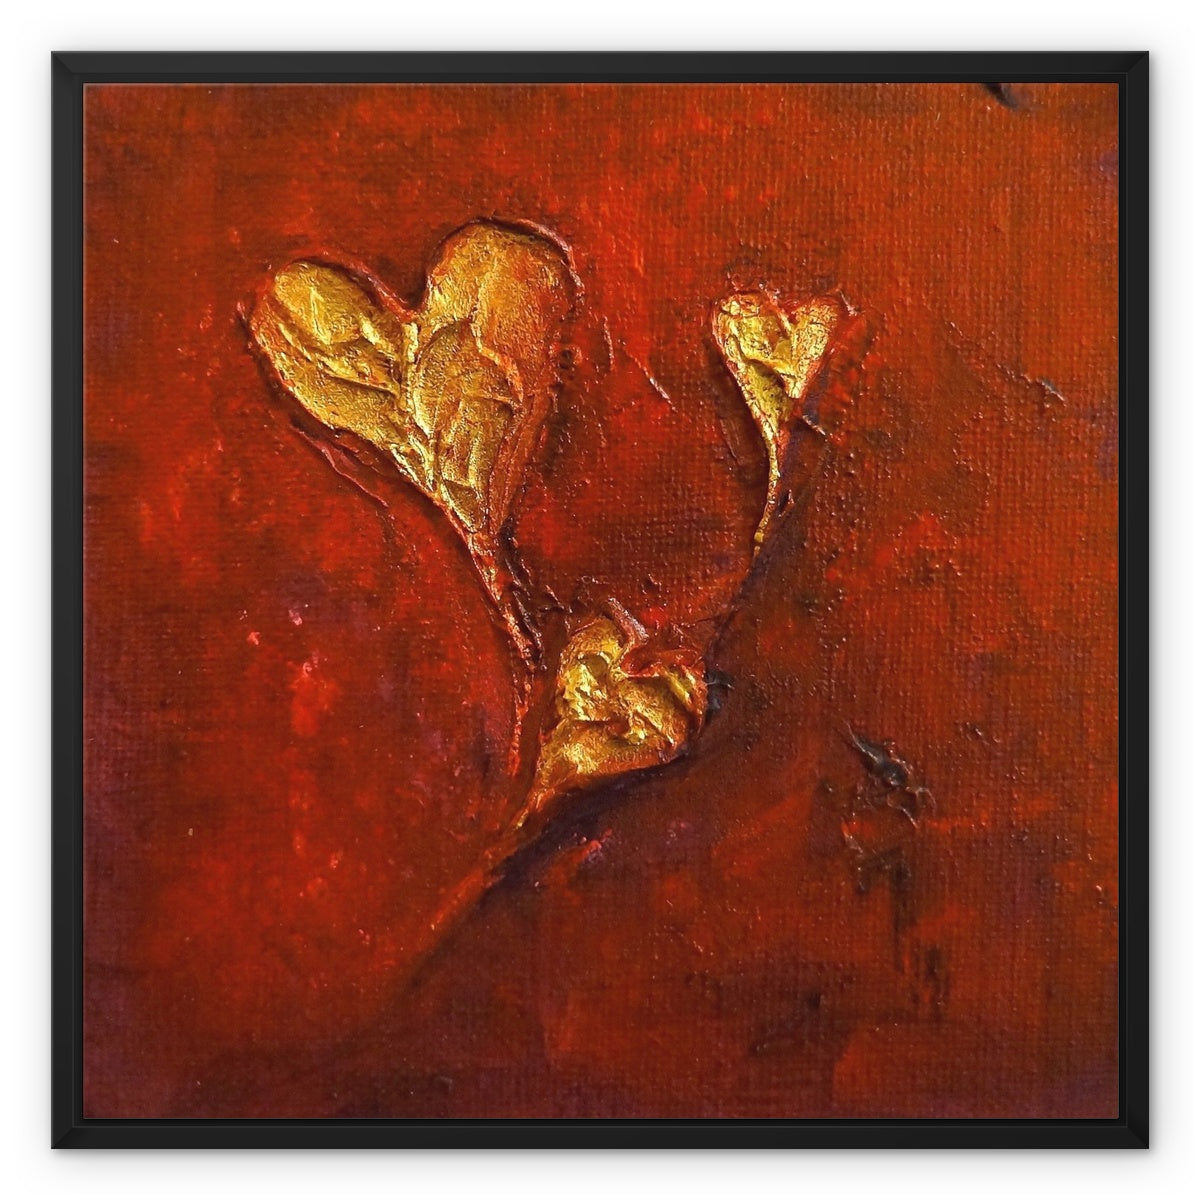 Hearts Abstract Painting | Framed Canvas From Scotland-Floating Framed Canvas Prints-Abstract & Impressionistic Art Gallery-24"x24"-Paintings, Prints, Homeware, Art Gifts From Scotland By Scottish Artist Kevin Hunter